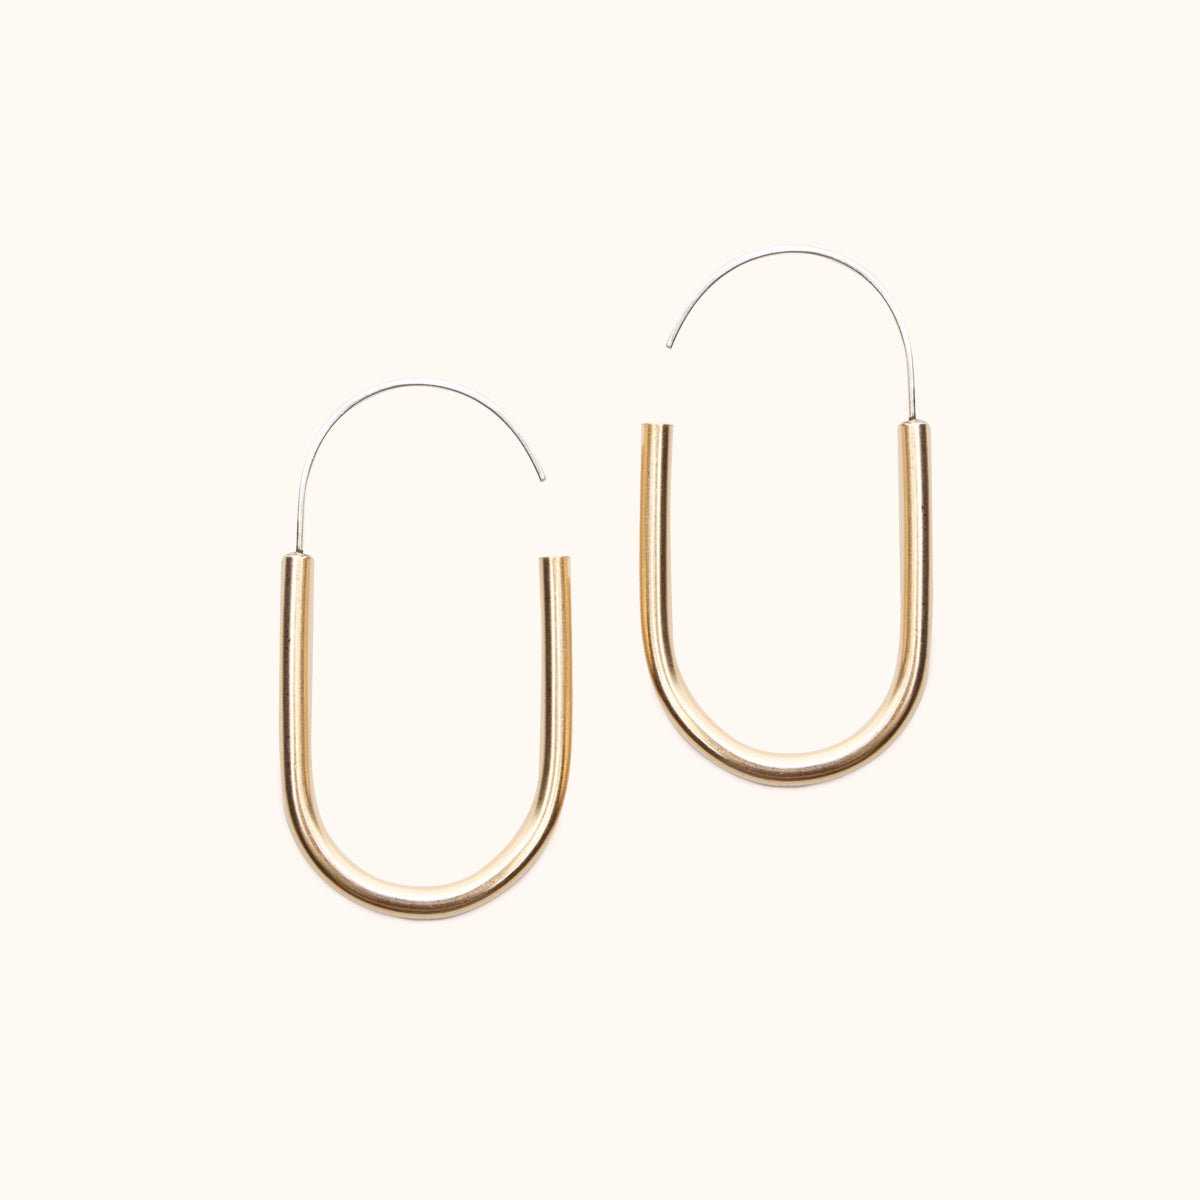 A small brass U-shaped earring with an arched sterling silver ear wire that leaves a slight opening. Designed and handcrafted in Portland, Oregon.